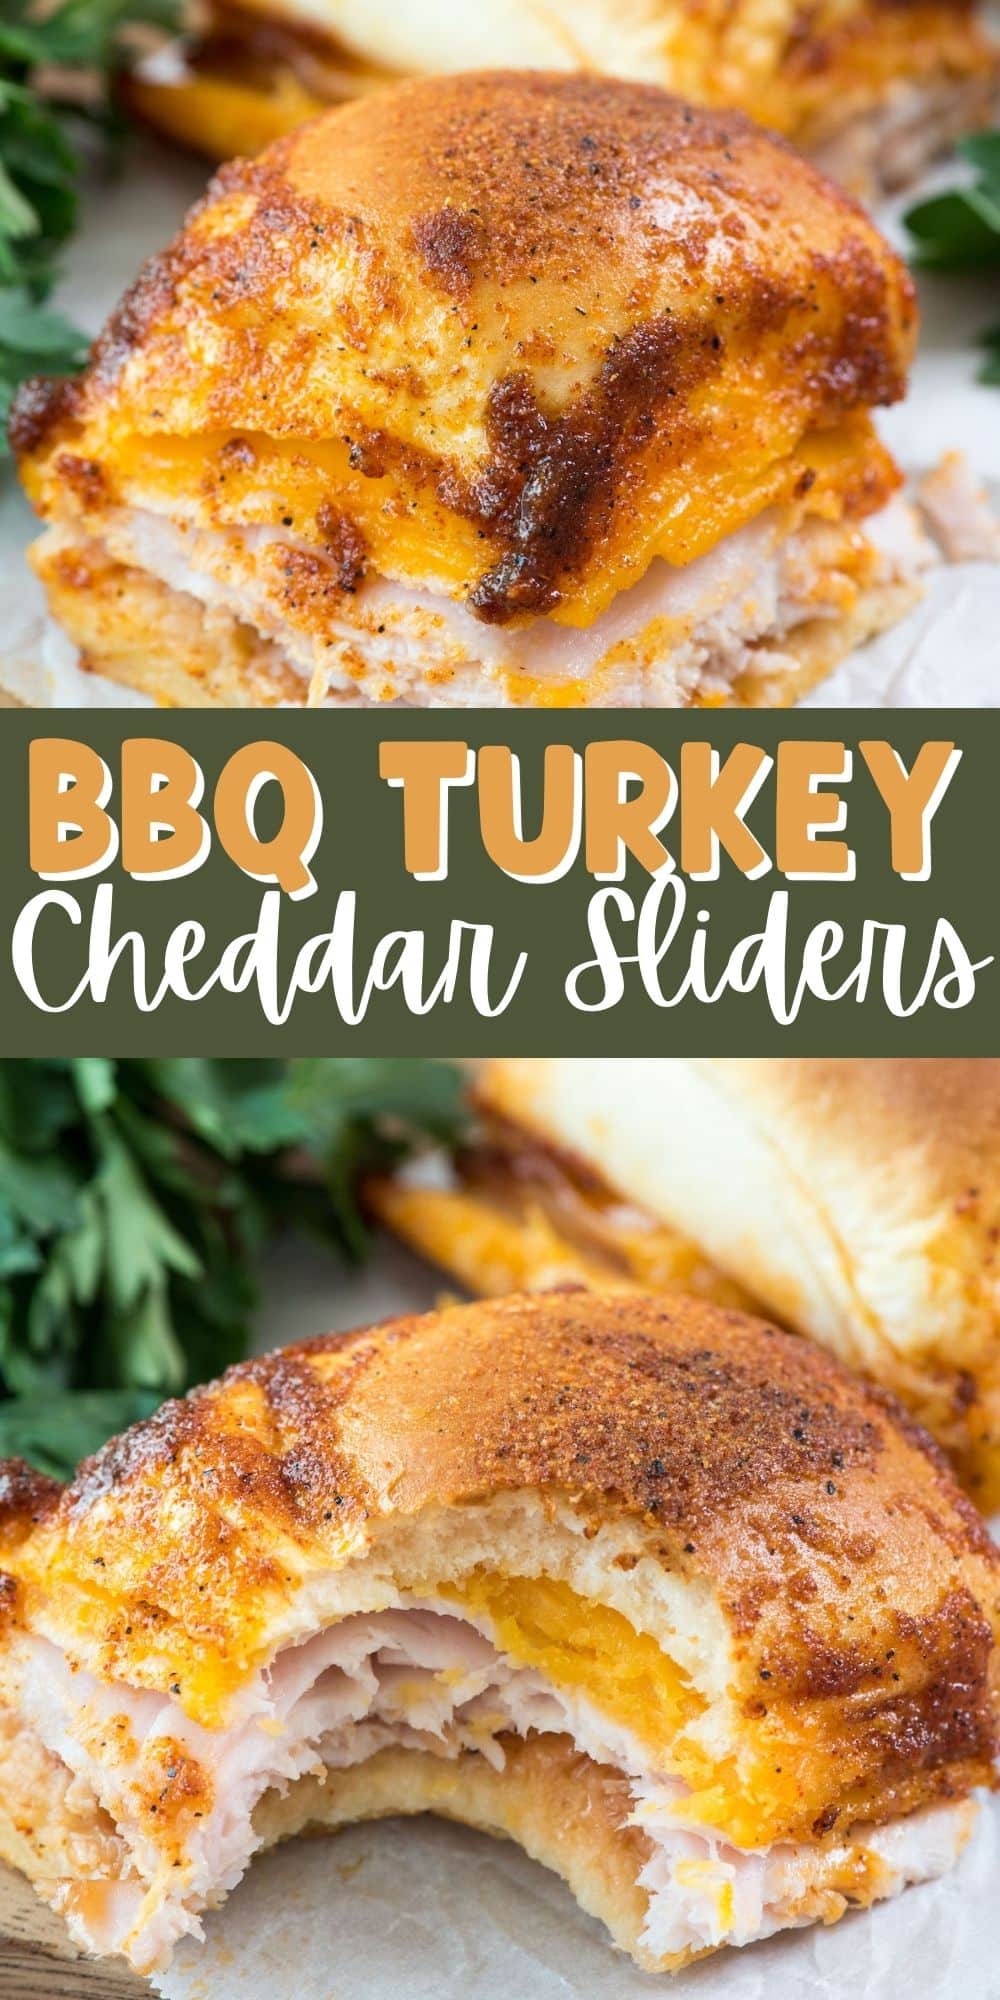 two photos of slider with cheese and turkey inside with words on top